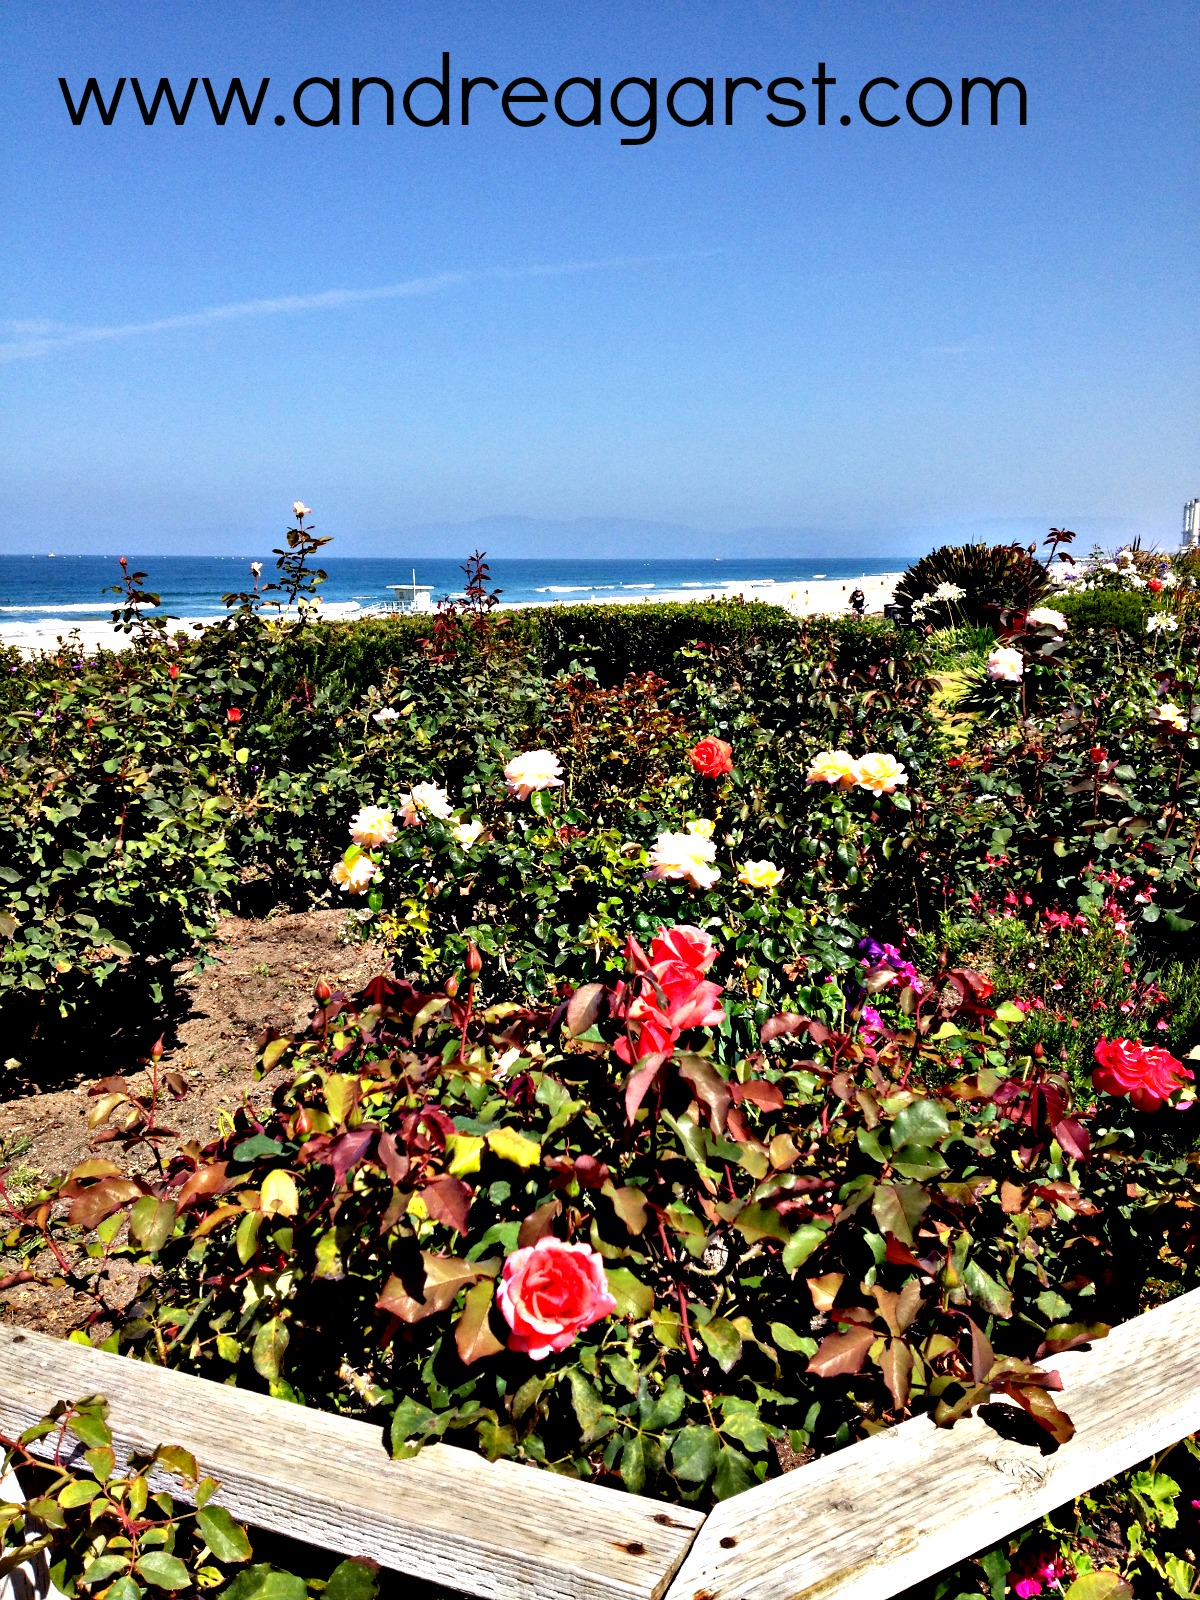 I love that the homeowners on the Strand plant so many types of roses. They look and smell amazing!